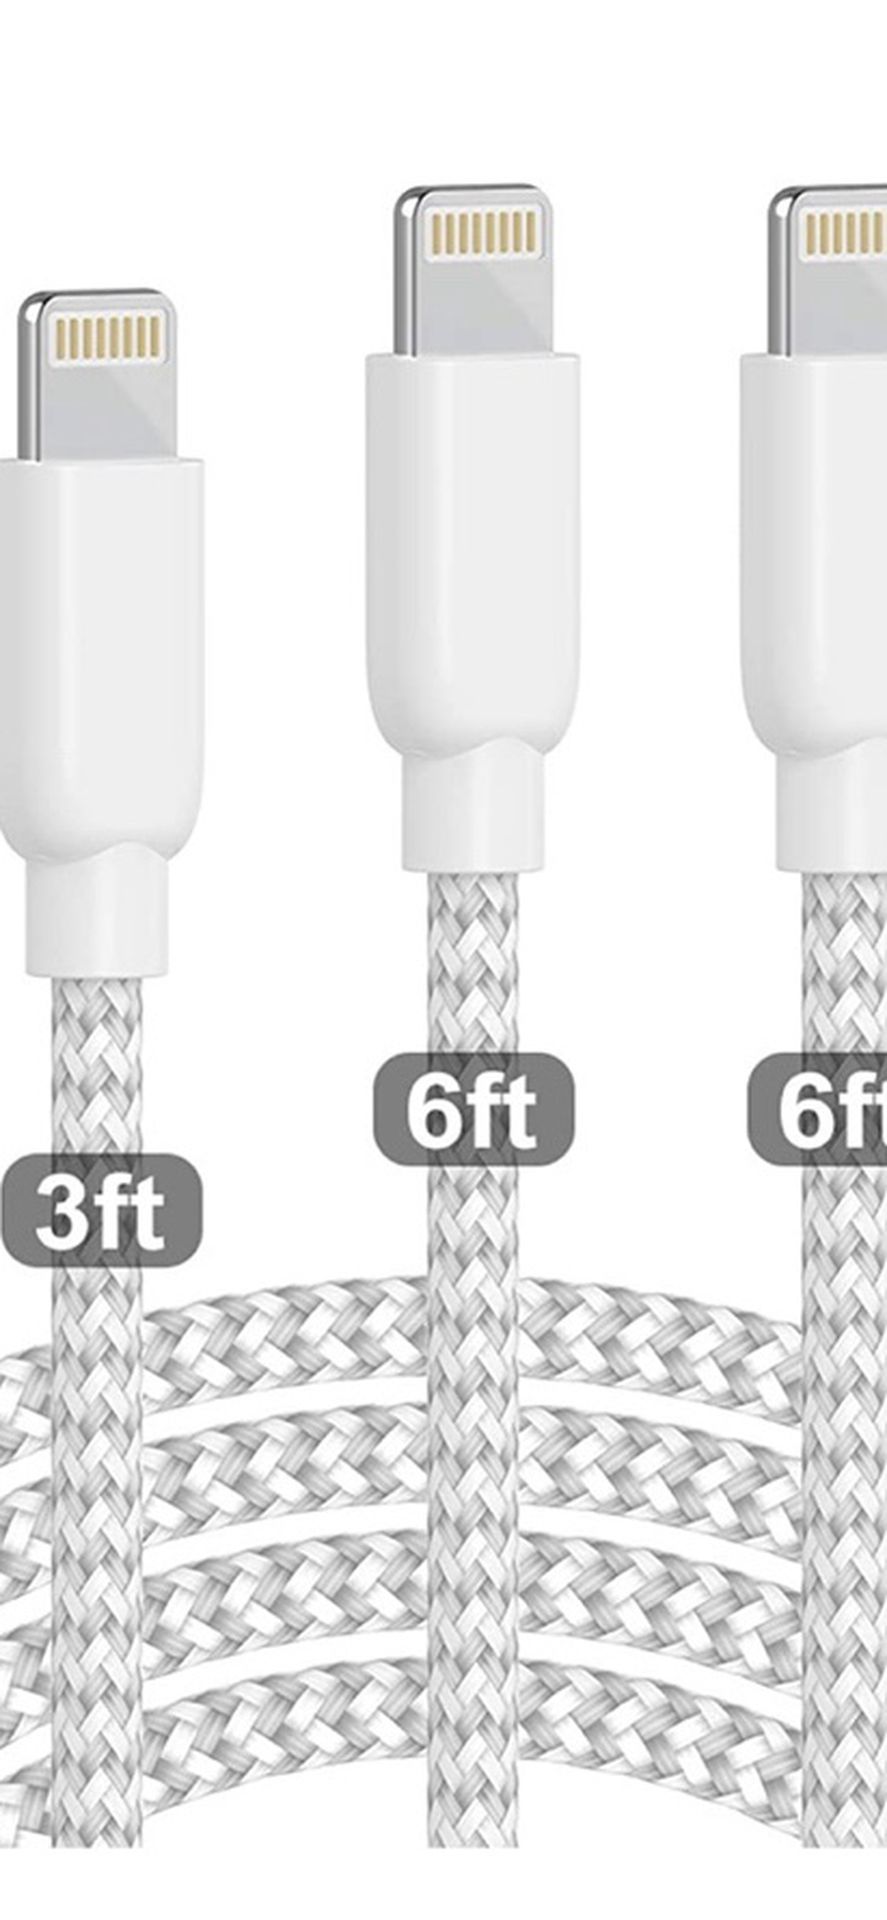 Charger PLmuzsz MFi Certified Lightning Cable 5 Pack(3+3+6+6+10ft) High Speed Nylon Braided USB Fast Charging&Data Syncs Cord Compatible iPhone 11 Pro